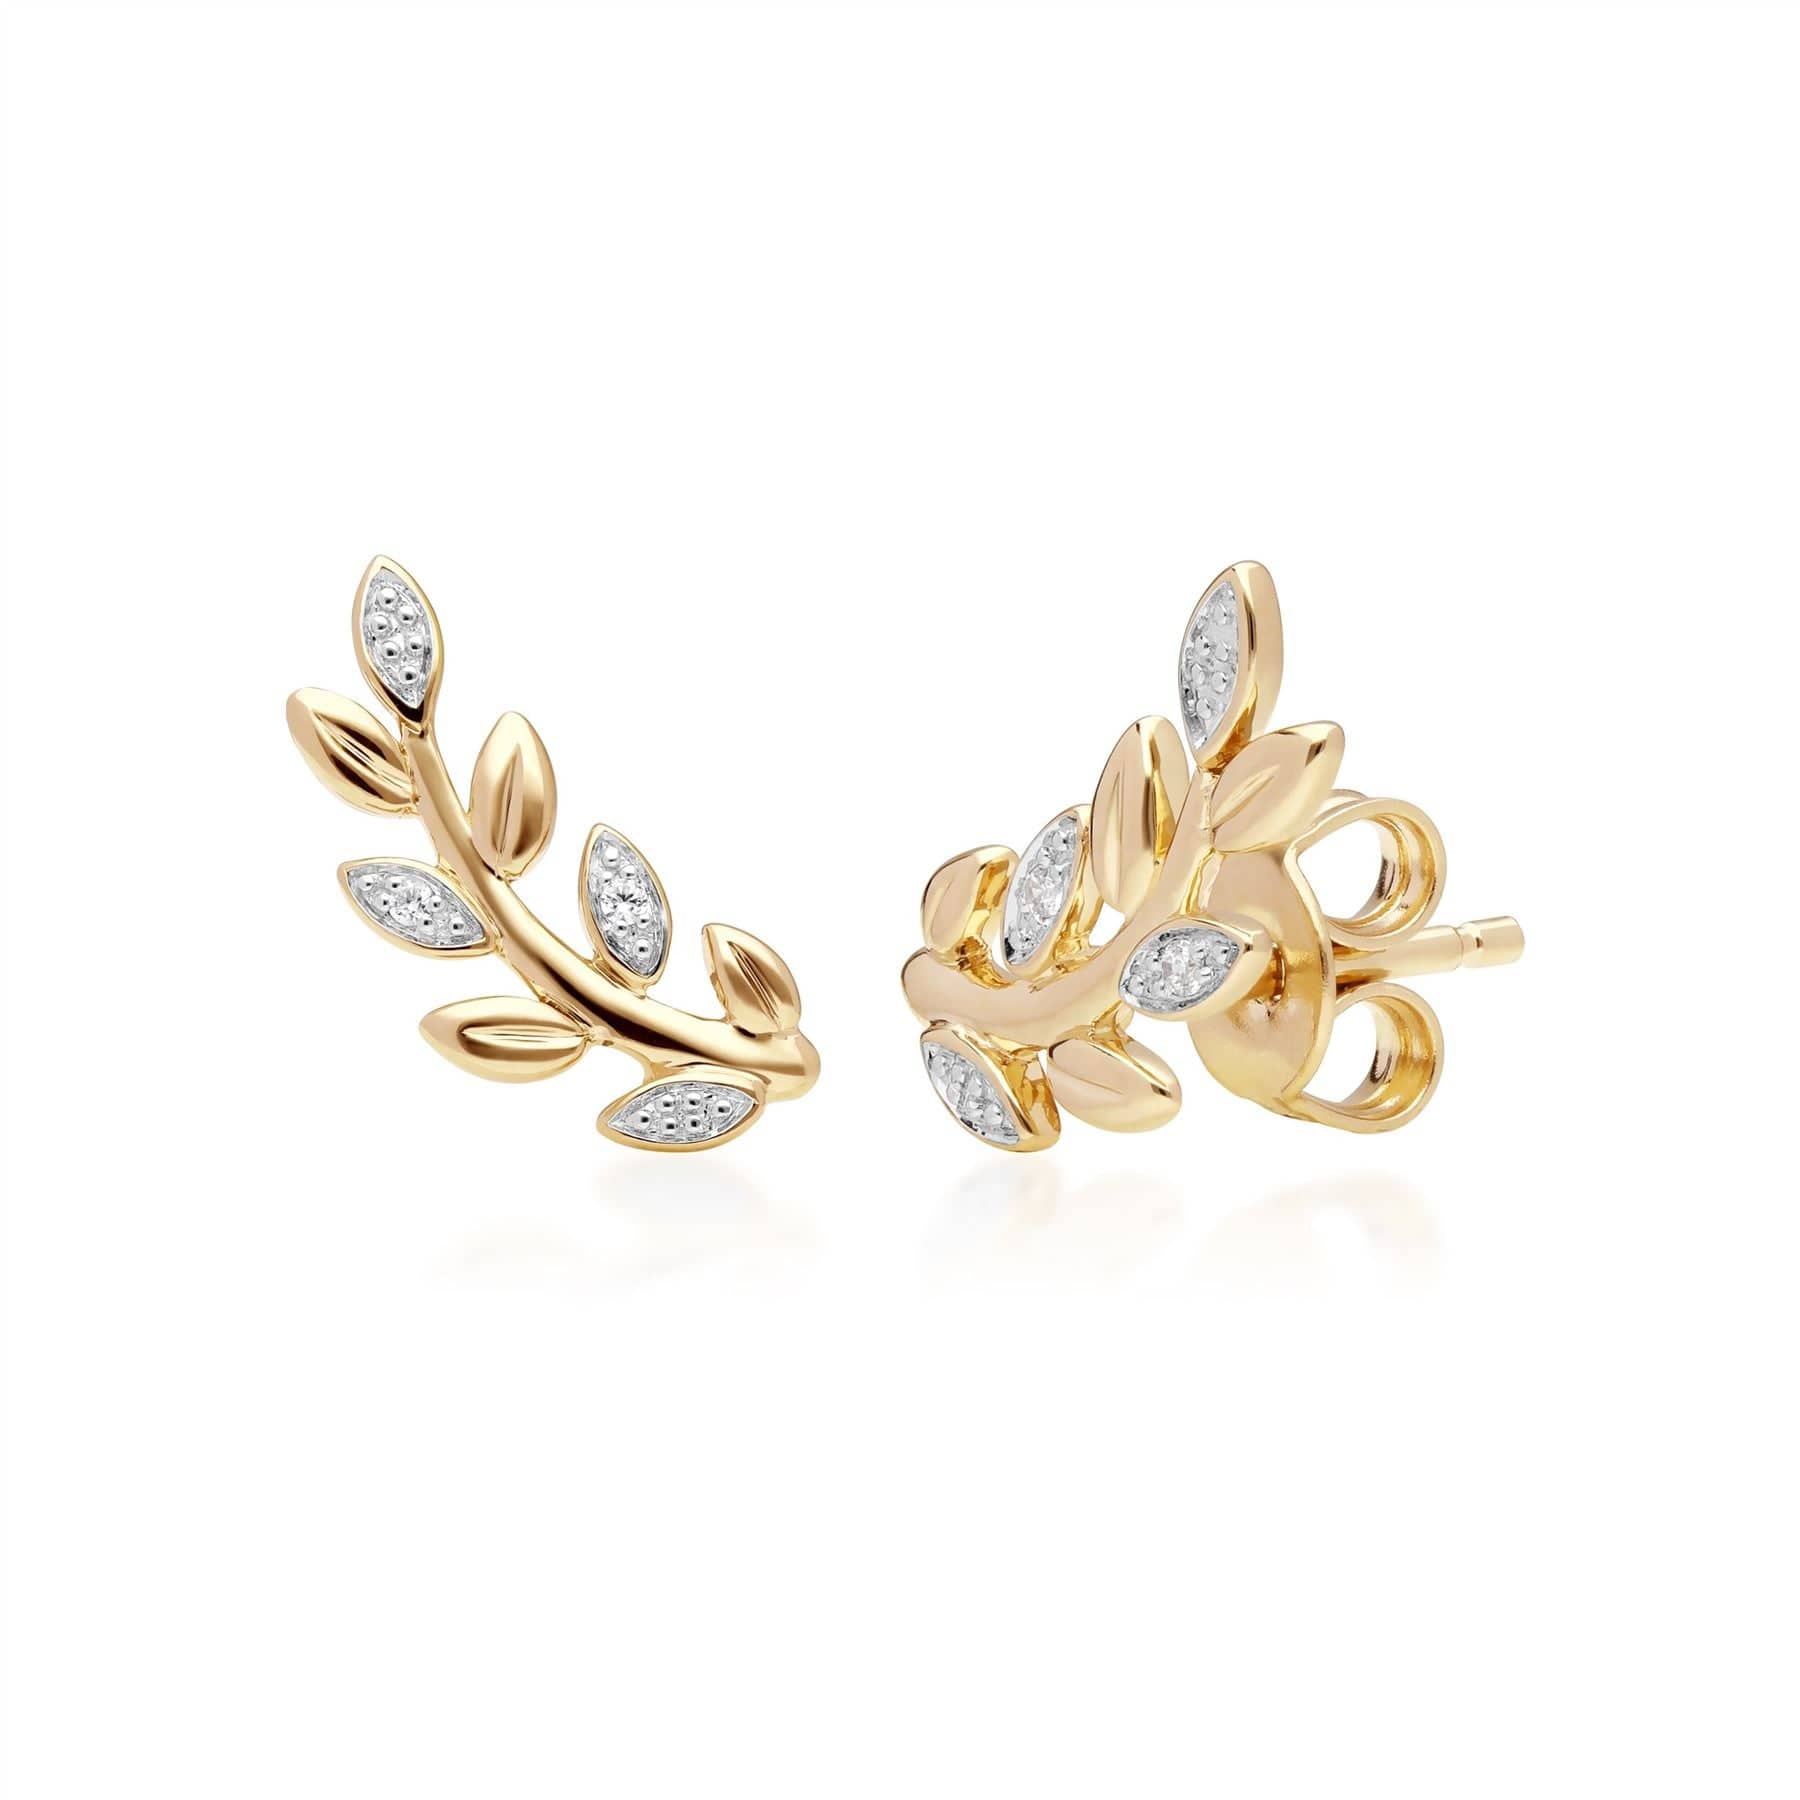 191E0403019 O Leaf Diamond Pave Stud Earrings in 9ct Yellow Gold 1